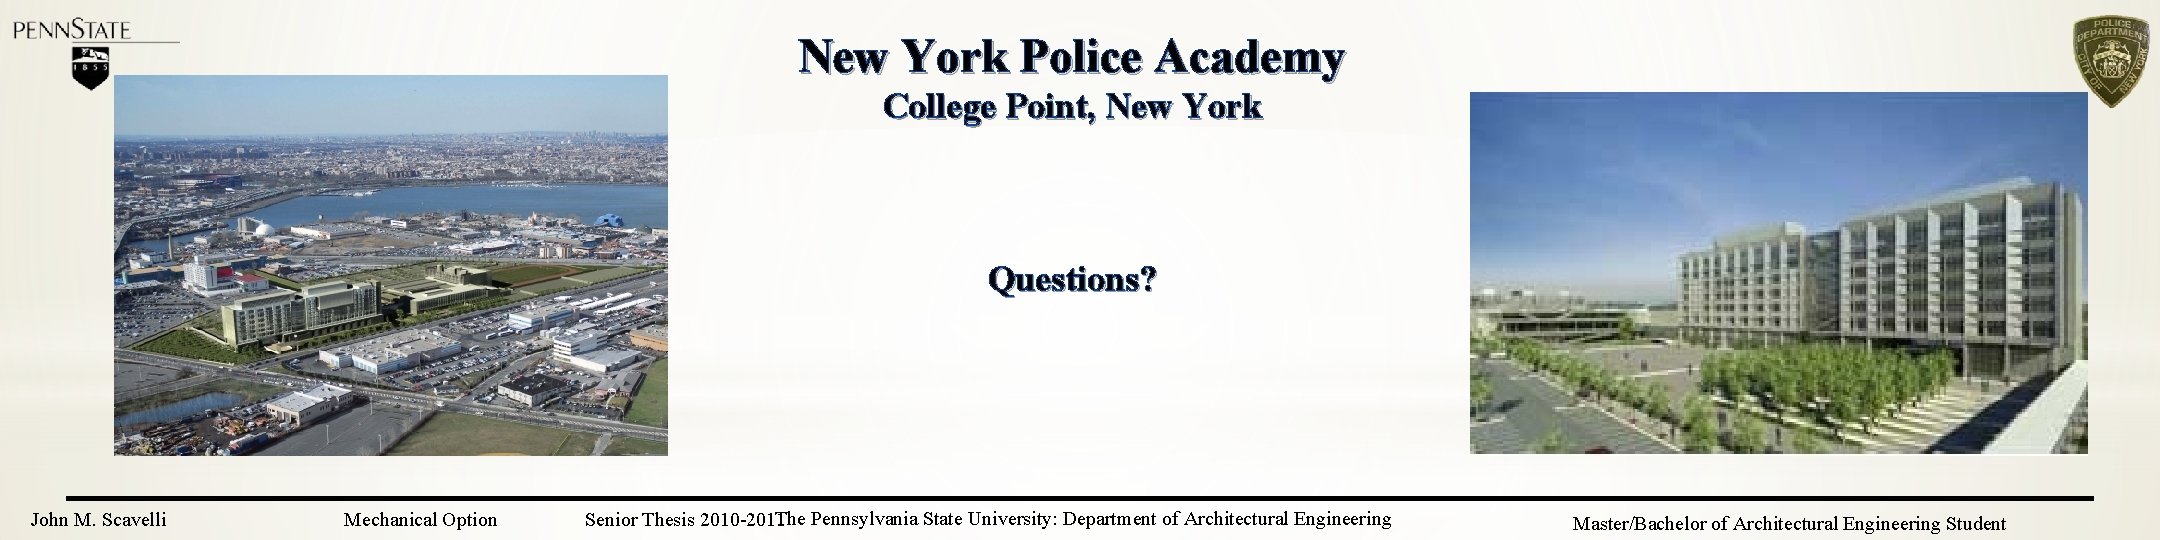 New York Police Academy College Point, New York Questions? John M. Scavelli Mechanical Option